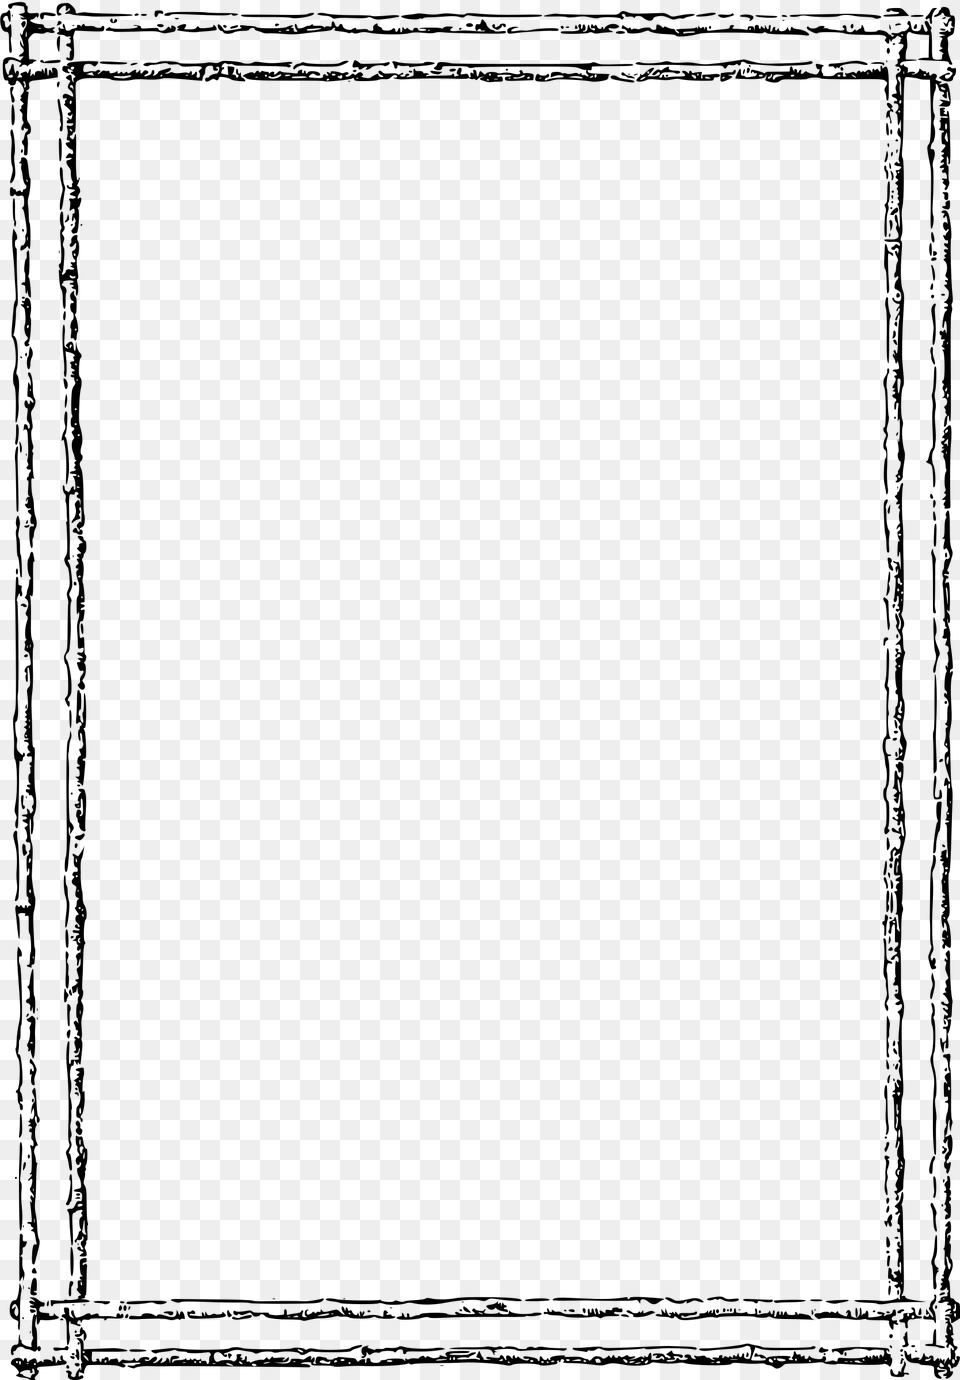 Cane Frame Clip Arts Butterfly Border Black And White, Gray Png Image